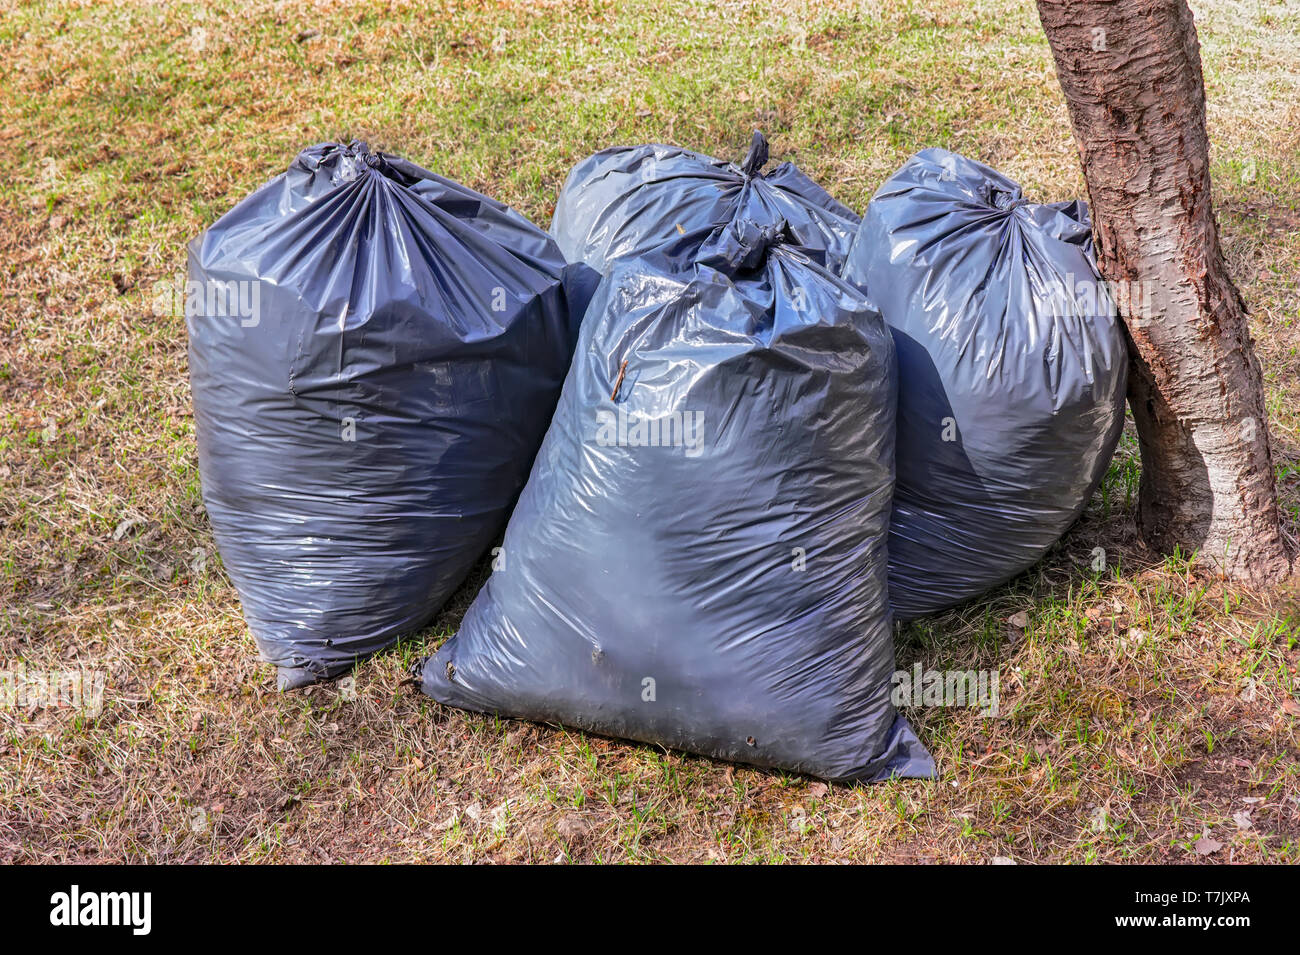 https://c8.alamy.com/comp/T7JXPA/black-plastic-bags-with-last-years-dry-leaves-on-the-lawn-in-the-park-T7JXPA.jpg